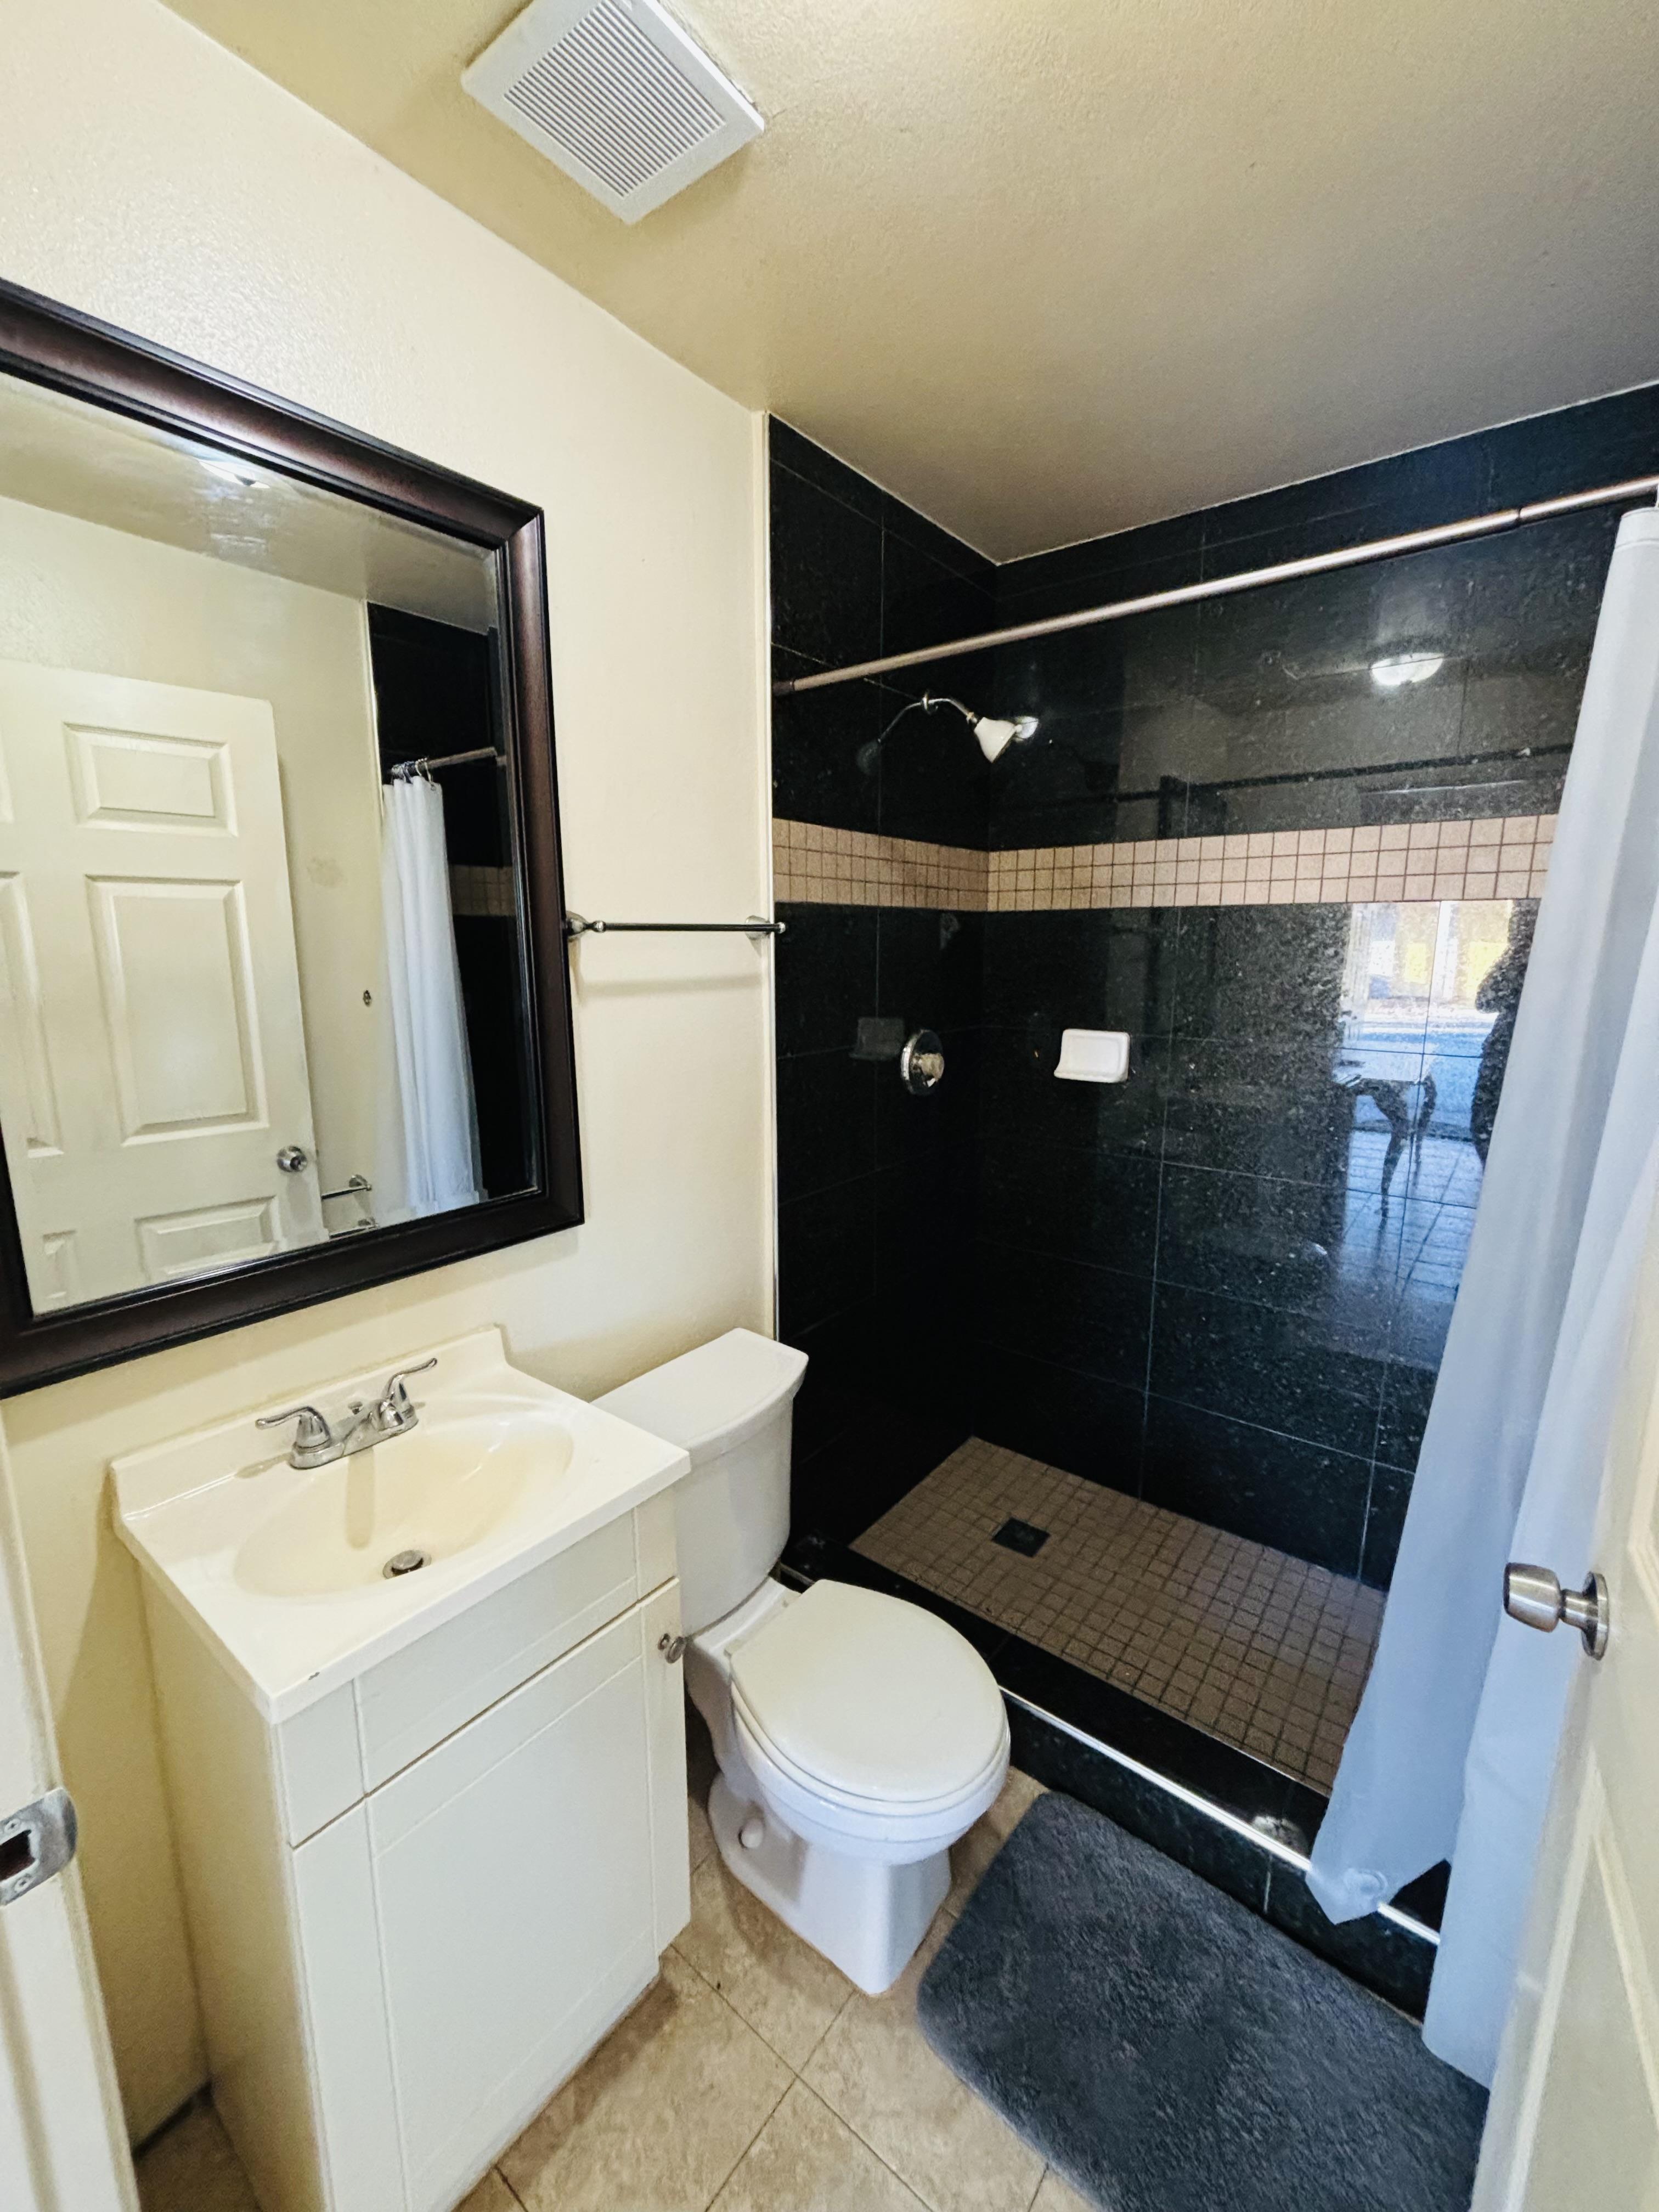 Rooms for rent with private bathroom in Henderson, NV